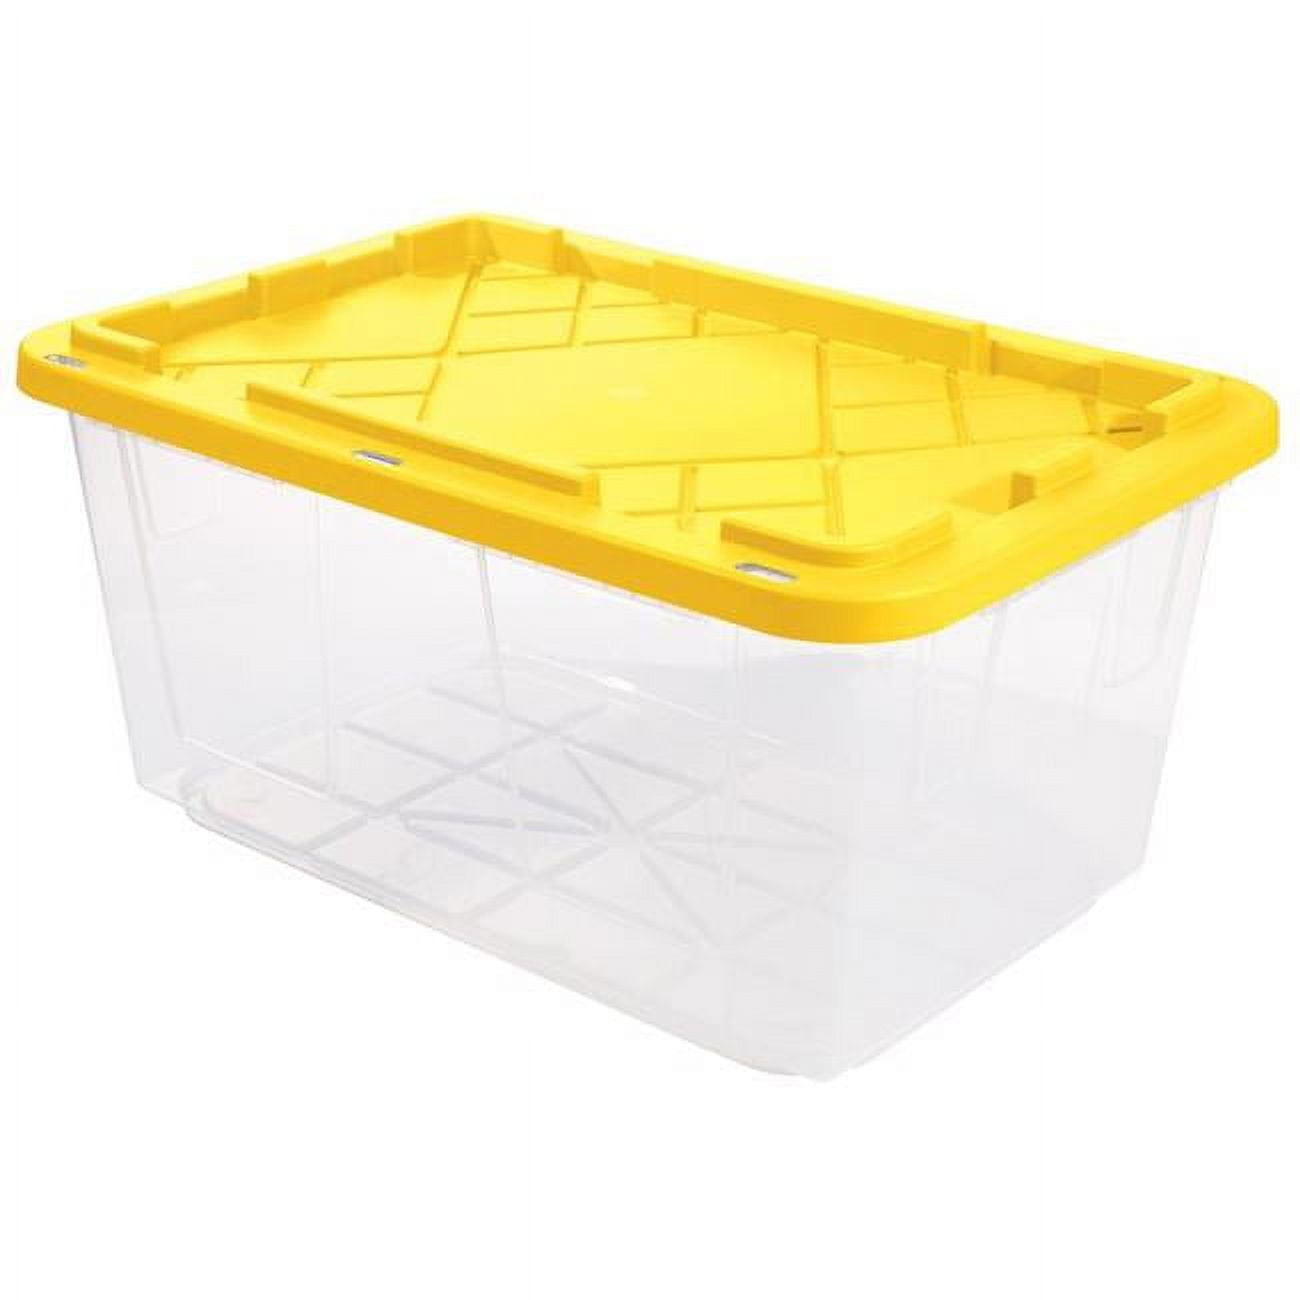 GREENMADE Extra Strong 27 Gallon Plastic Storage Bin, Multi Color, 4 Pack.  Heavy Duty Built With Snap Fit Lid. Factory Direct (Green & Yellow)